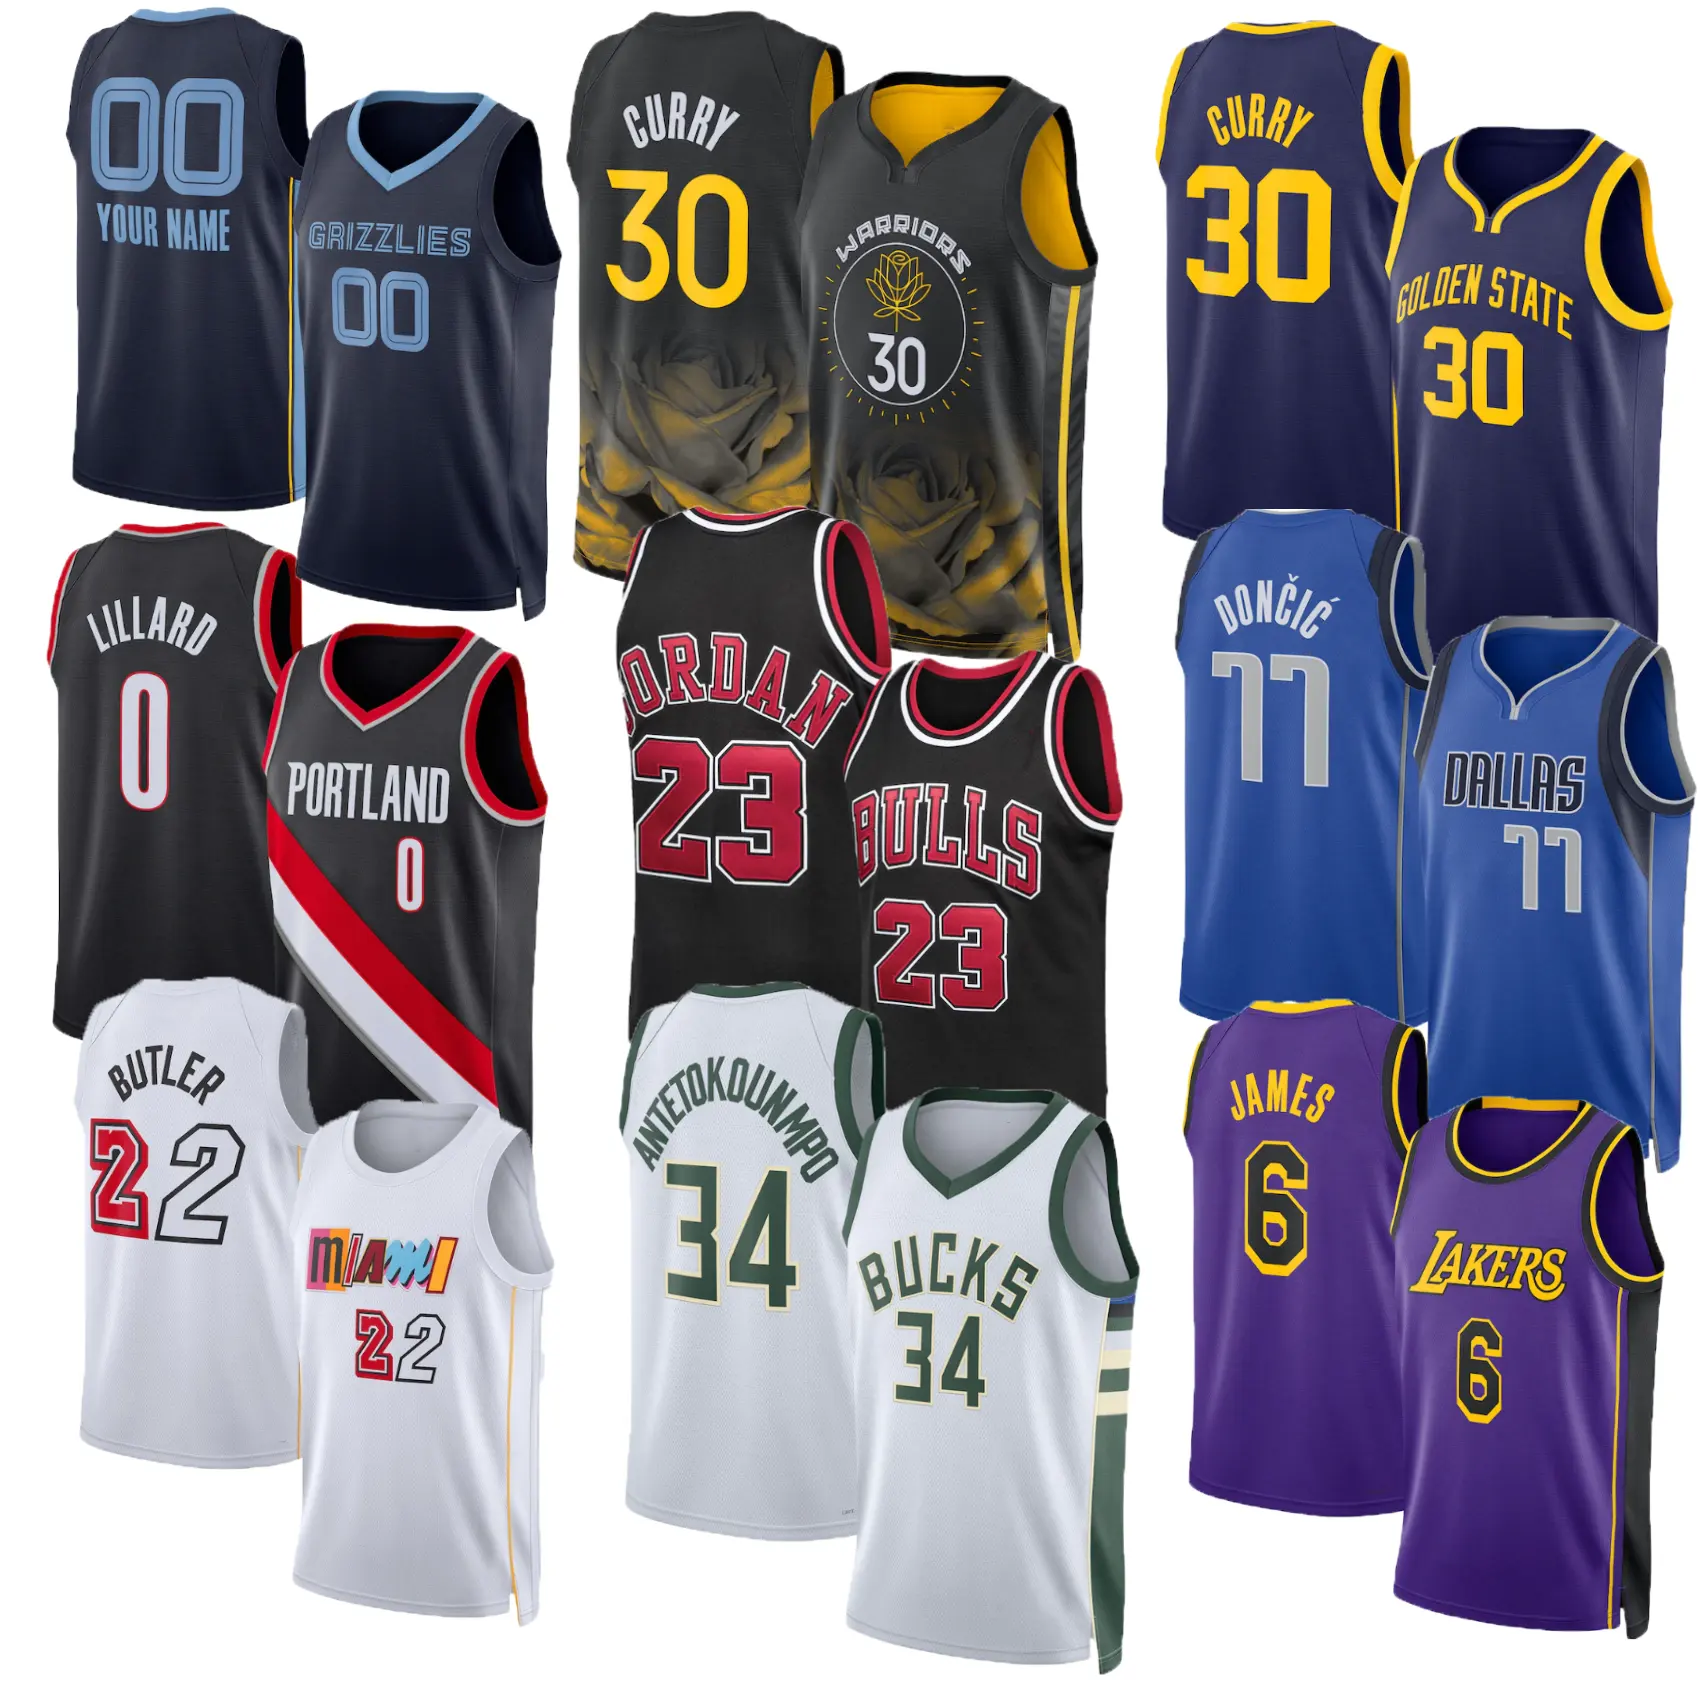 IN STOCK All Teams Basketball Jersey High Quality Embroidery Stitched Men Sports Shirt NBAA Jerseys